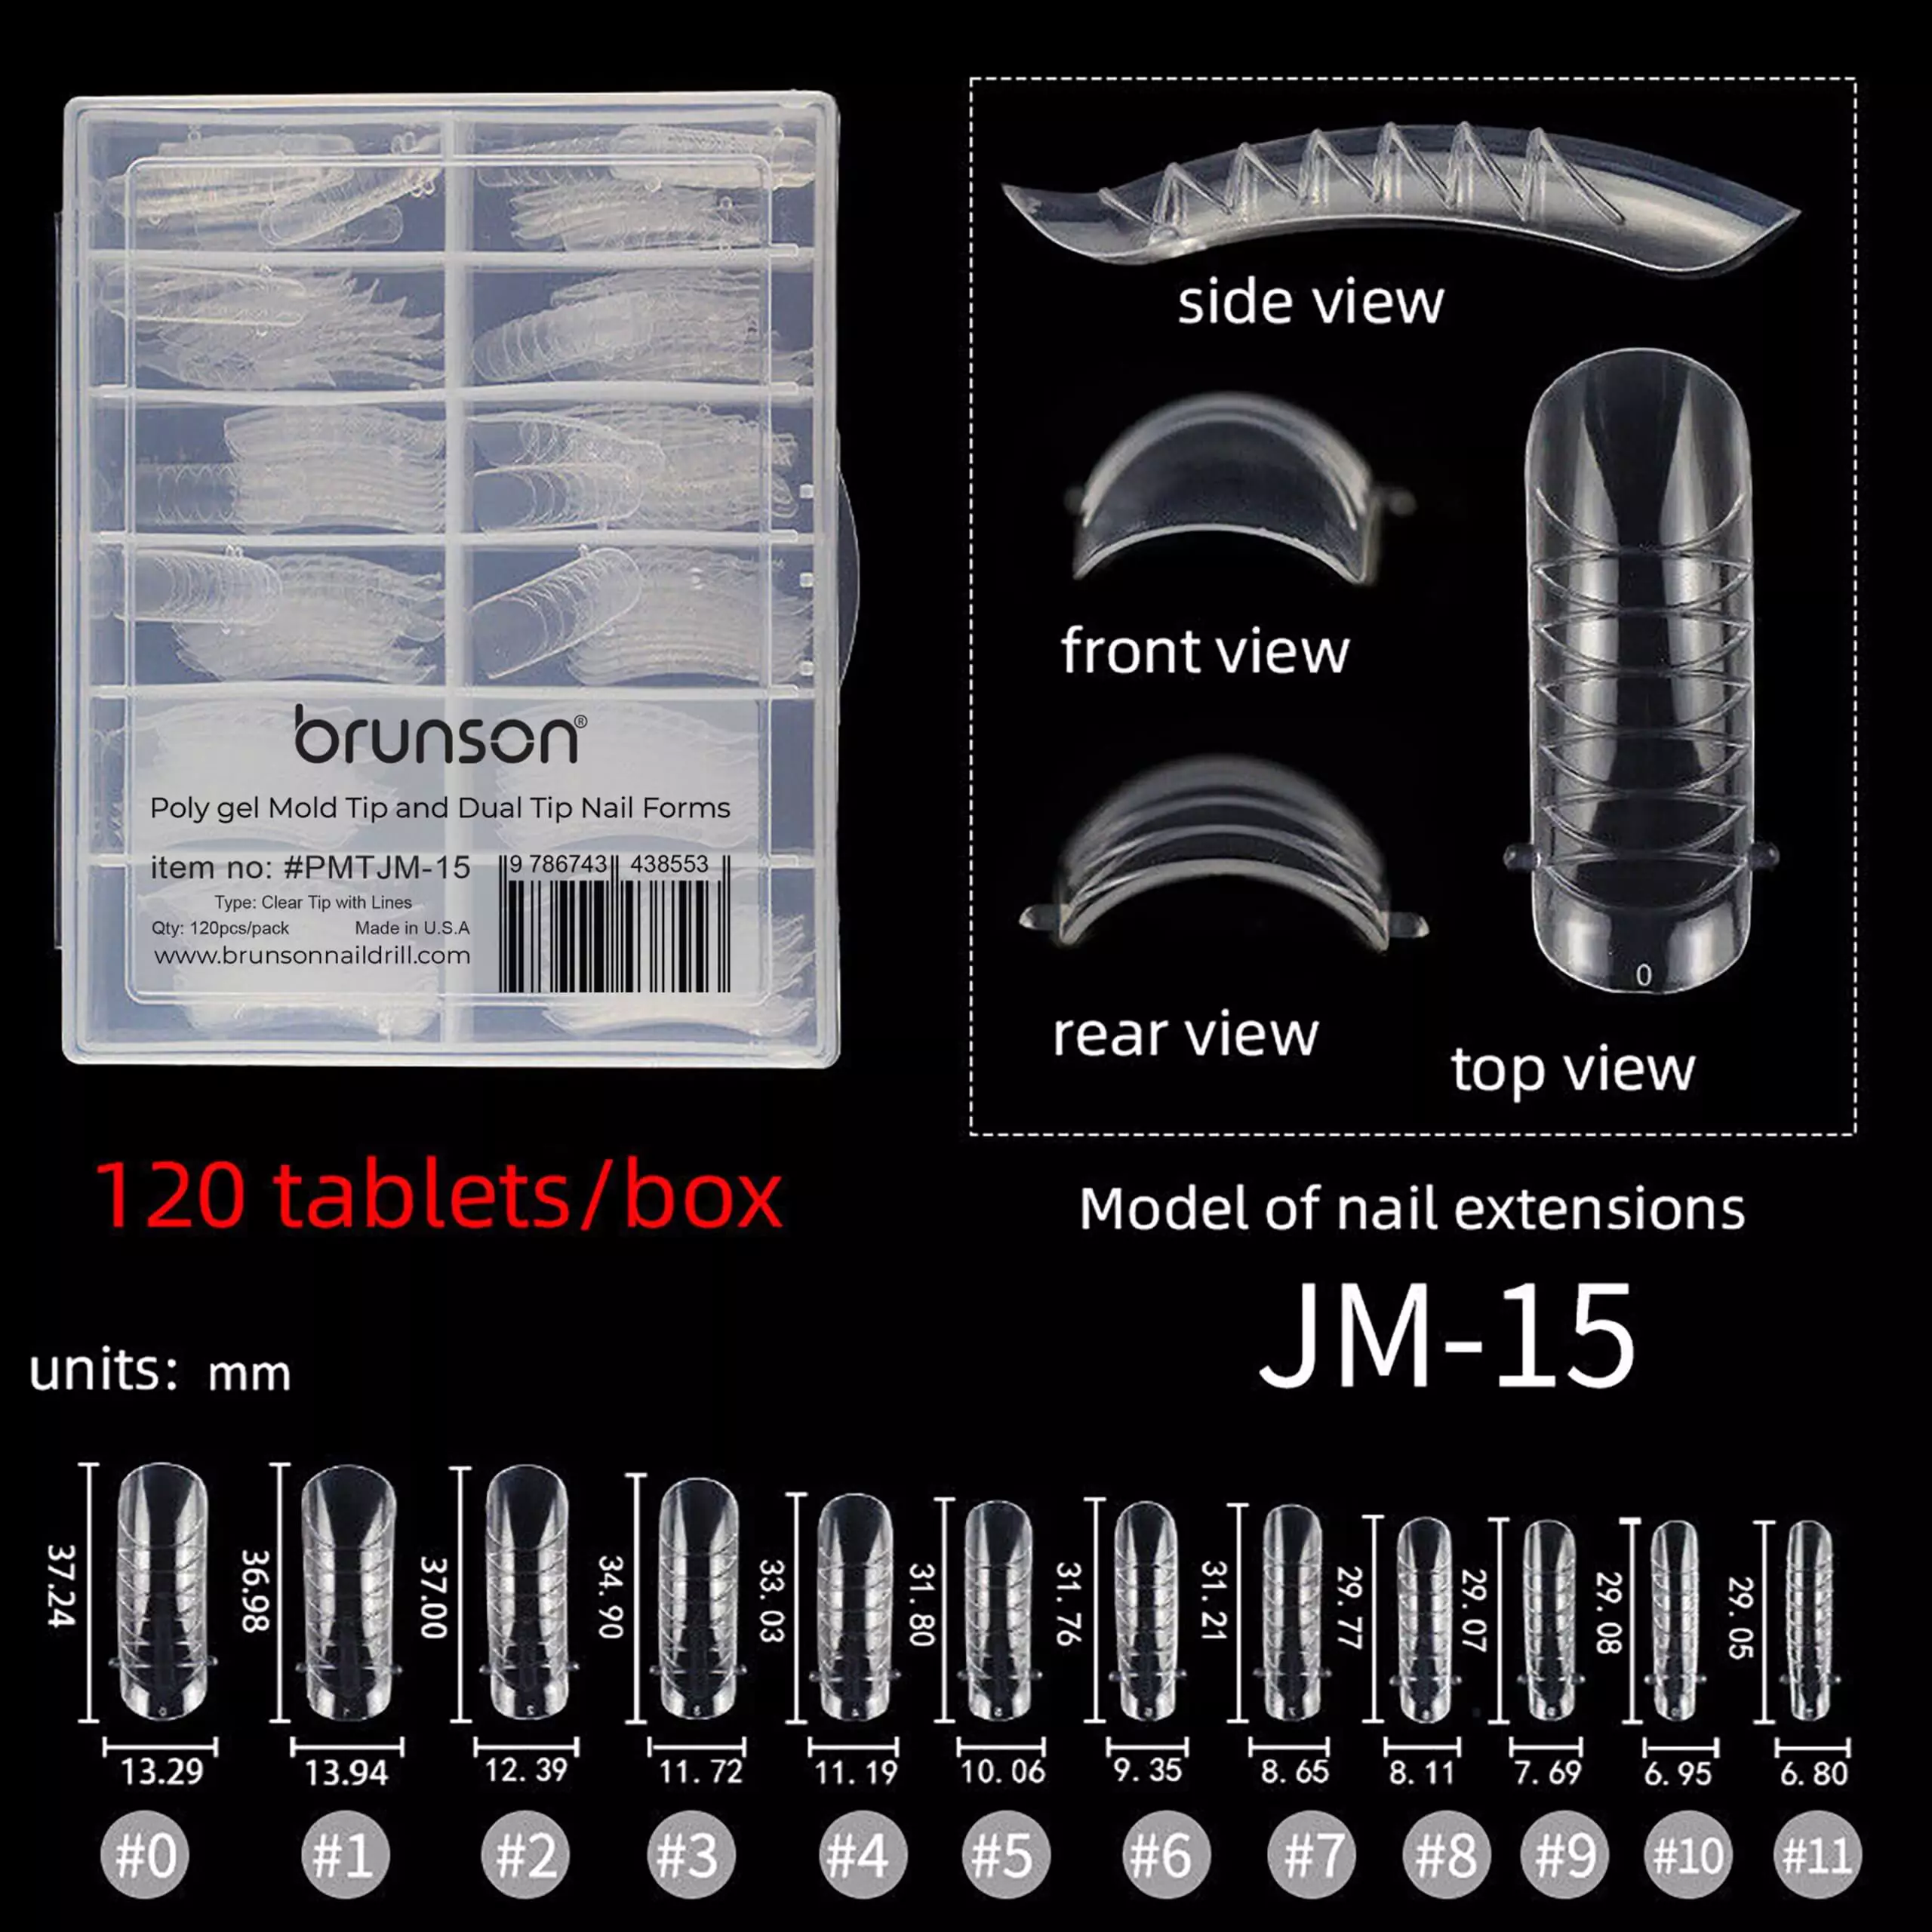 Poly-Gel-Mold-Tip-and-Dual-Tip-Nail-Forms-PMTJM-15-Brunson-4